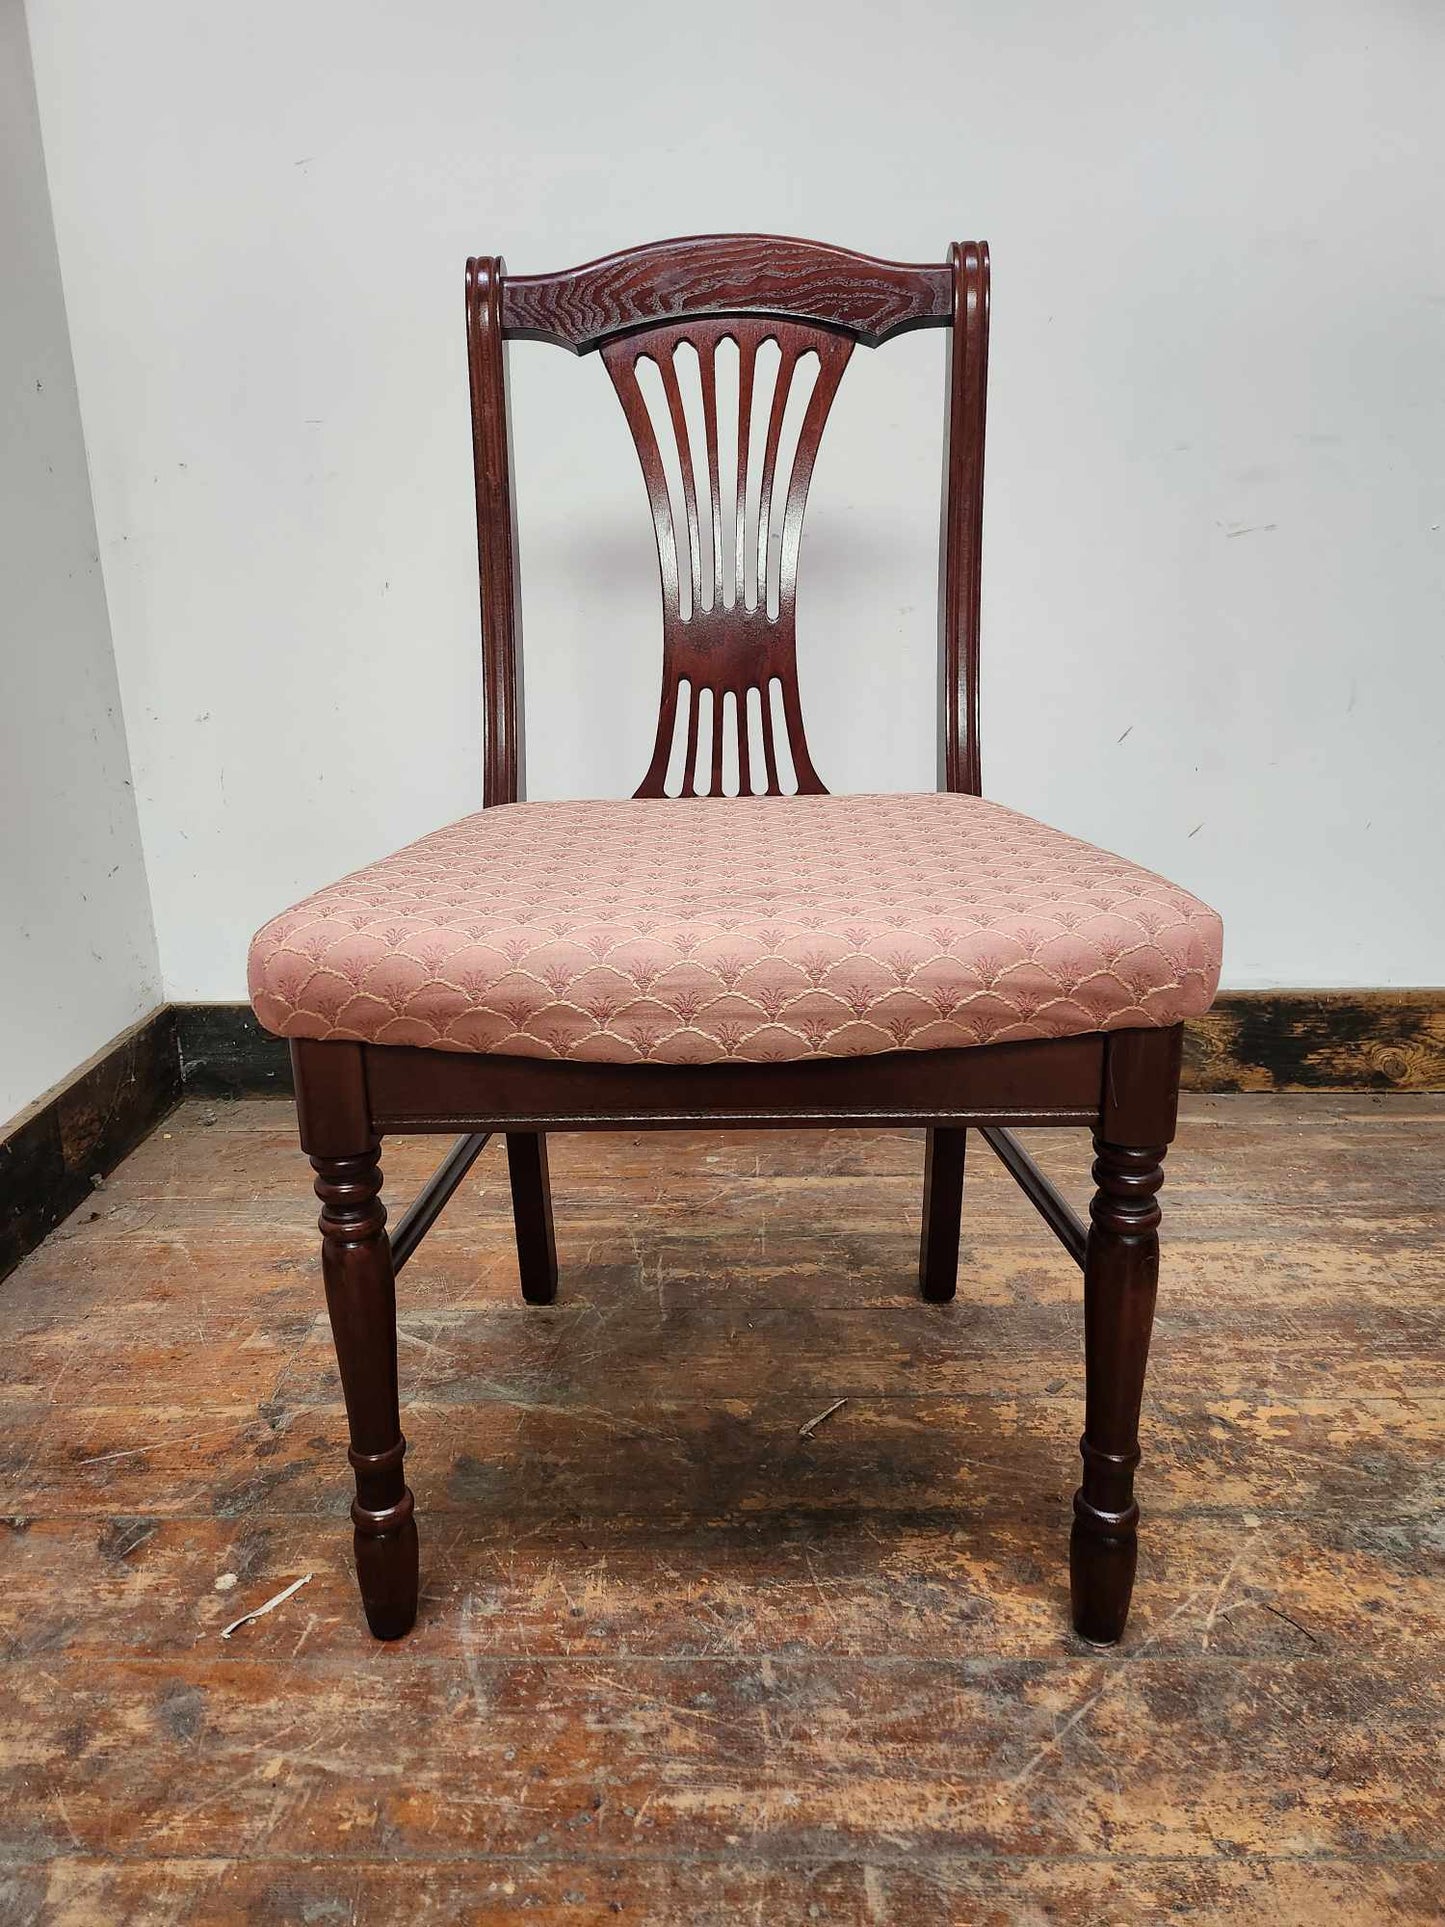 Set of Eight Mahogany Coloured Dining Chairs with Floral Upholstery